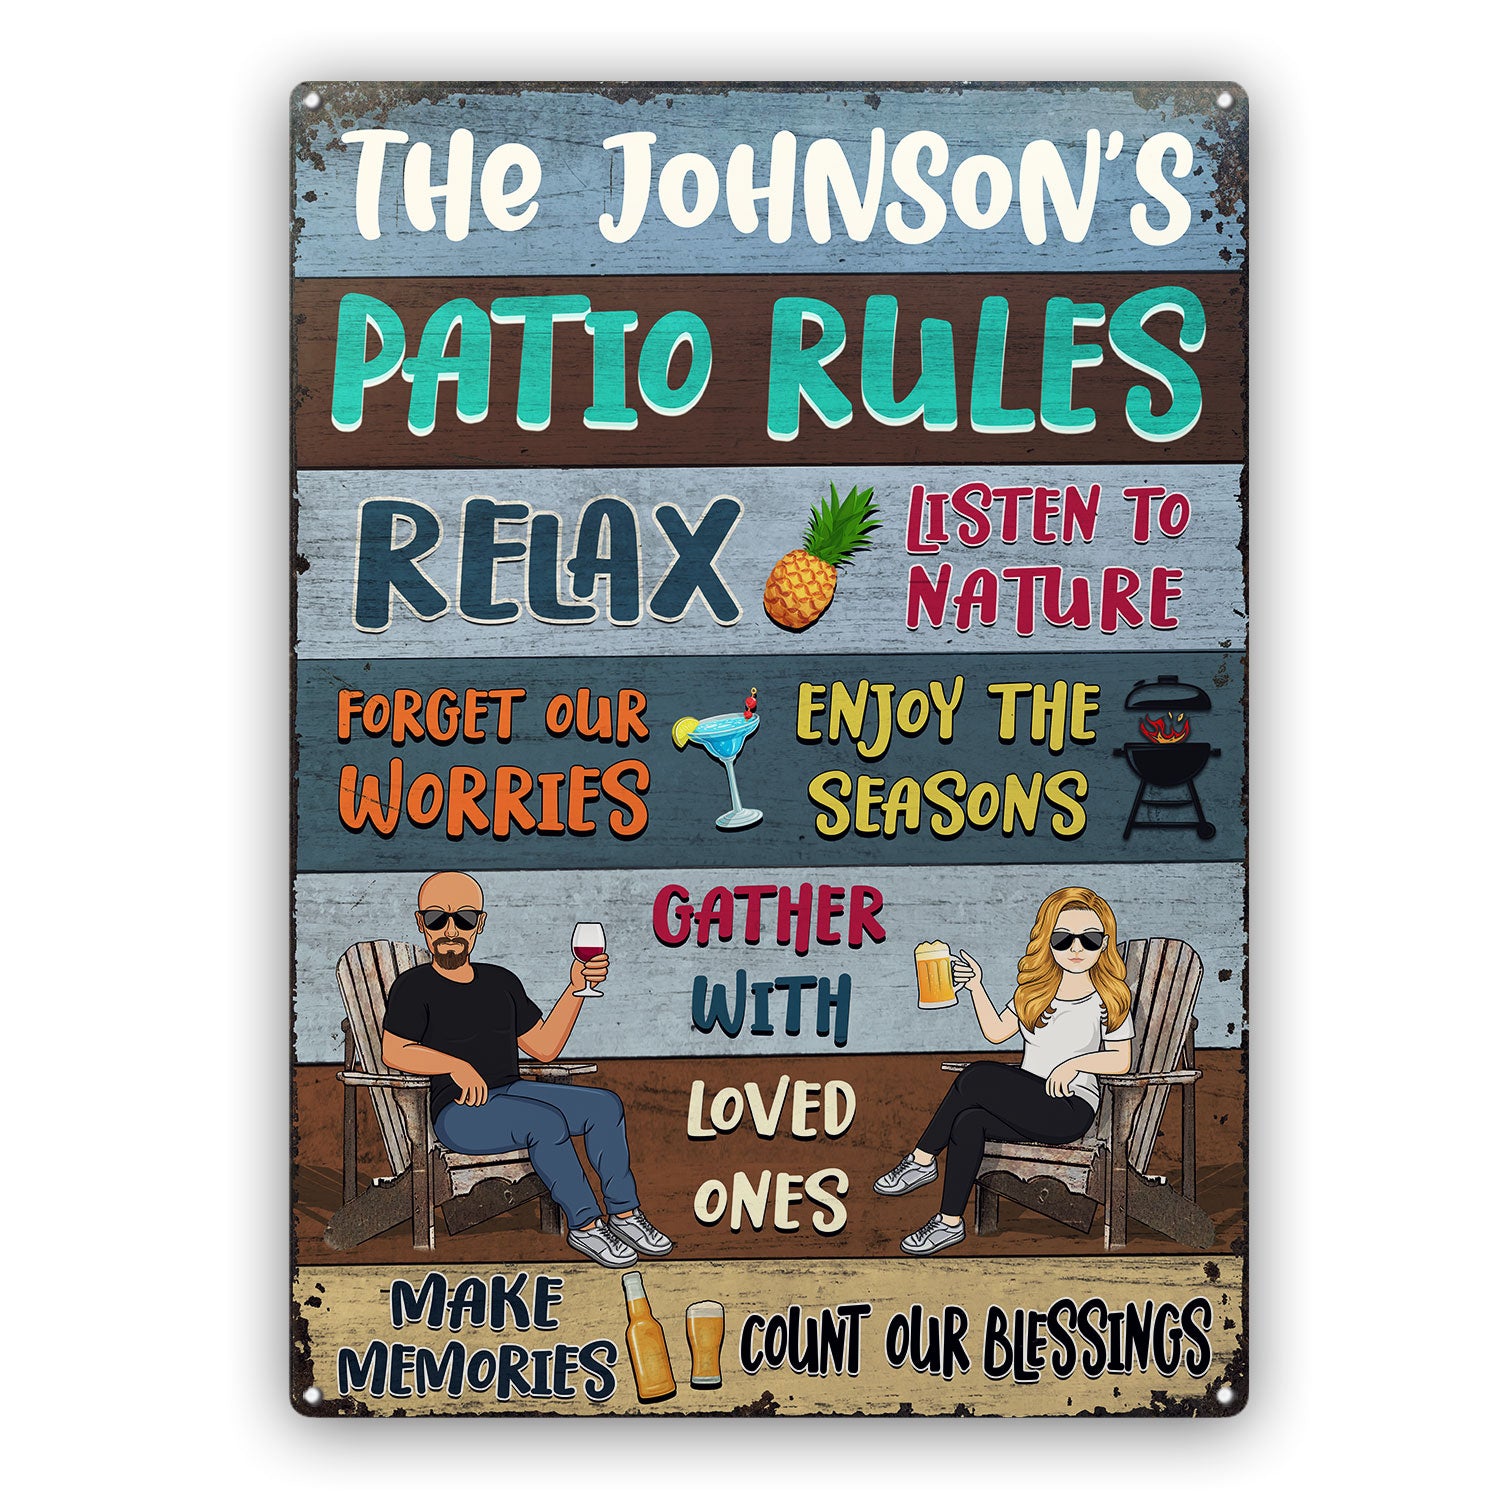 Grilling Patio Rules Relax Listen To Nature Couple Single - Home Decor, Backyard Decor, Gift For Her, Him, Family, Husband, Wife - Personalized Custom Classic Metal Signs